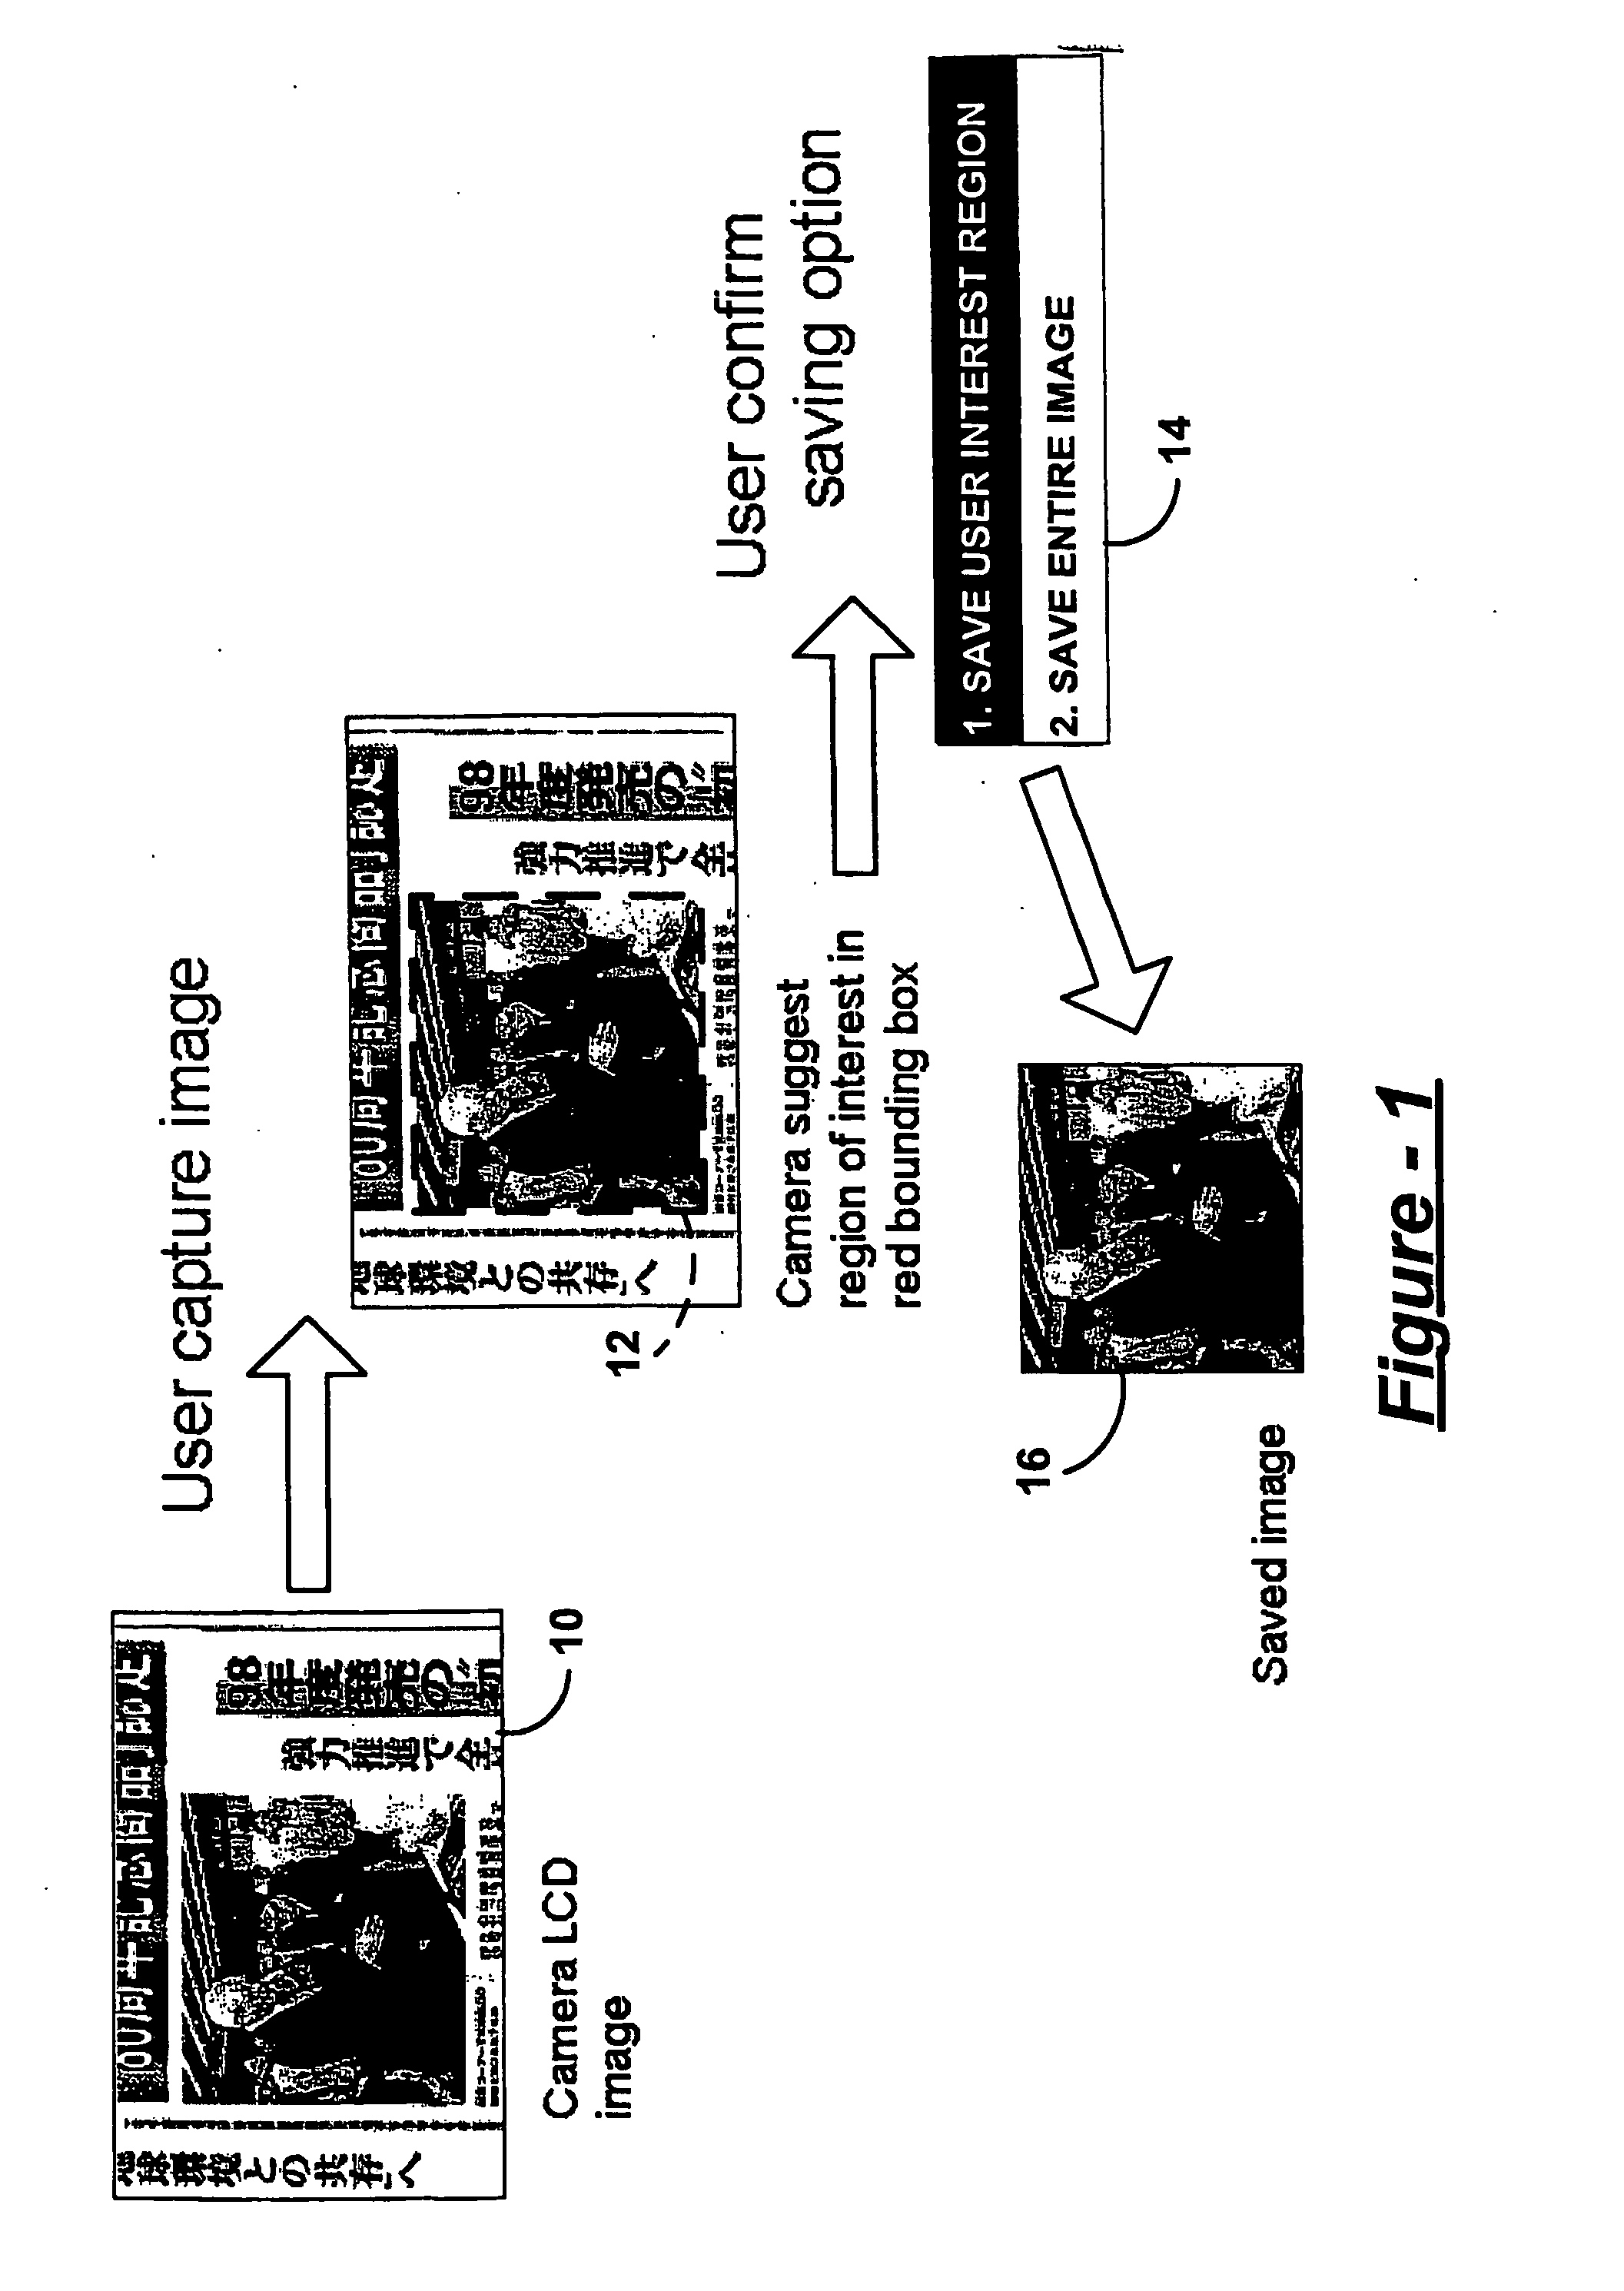 Automatic image cropping system and method for use with portable devices equipped with digital cameras